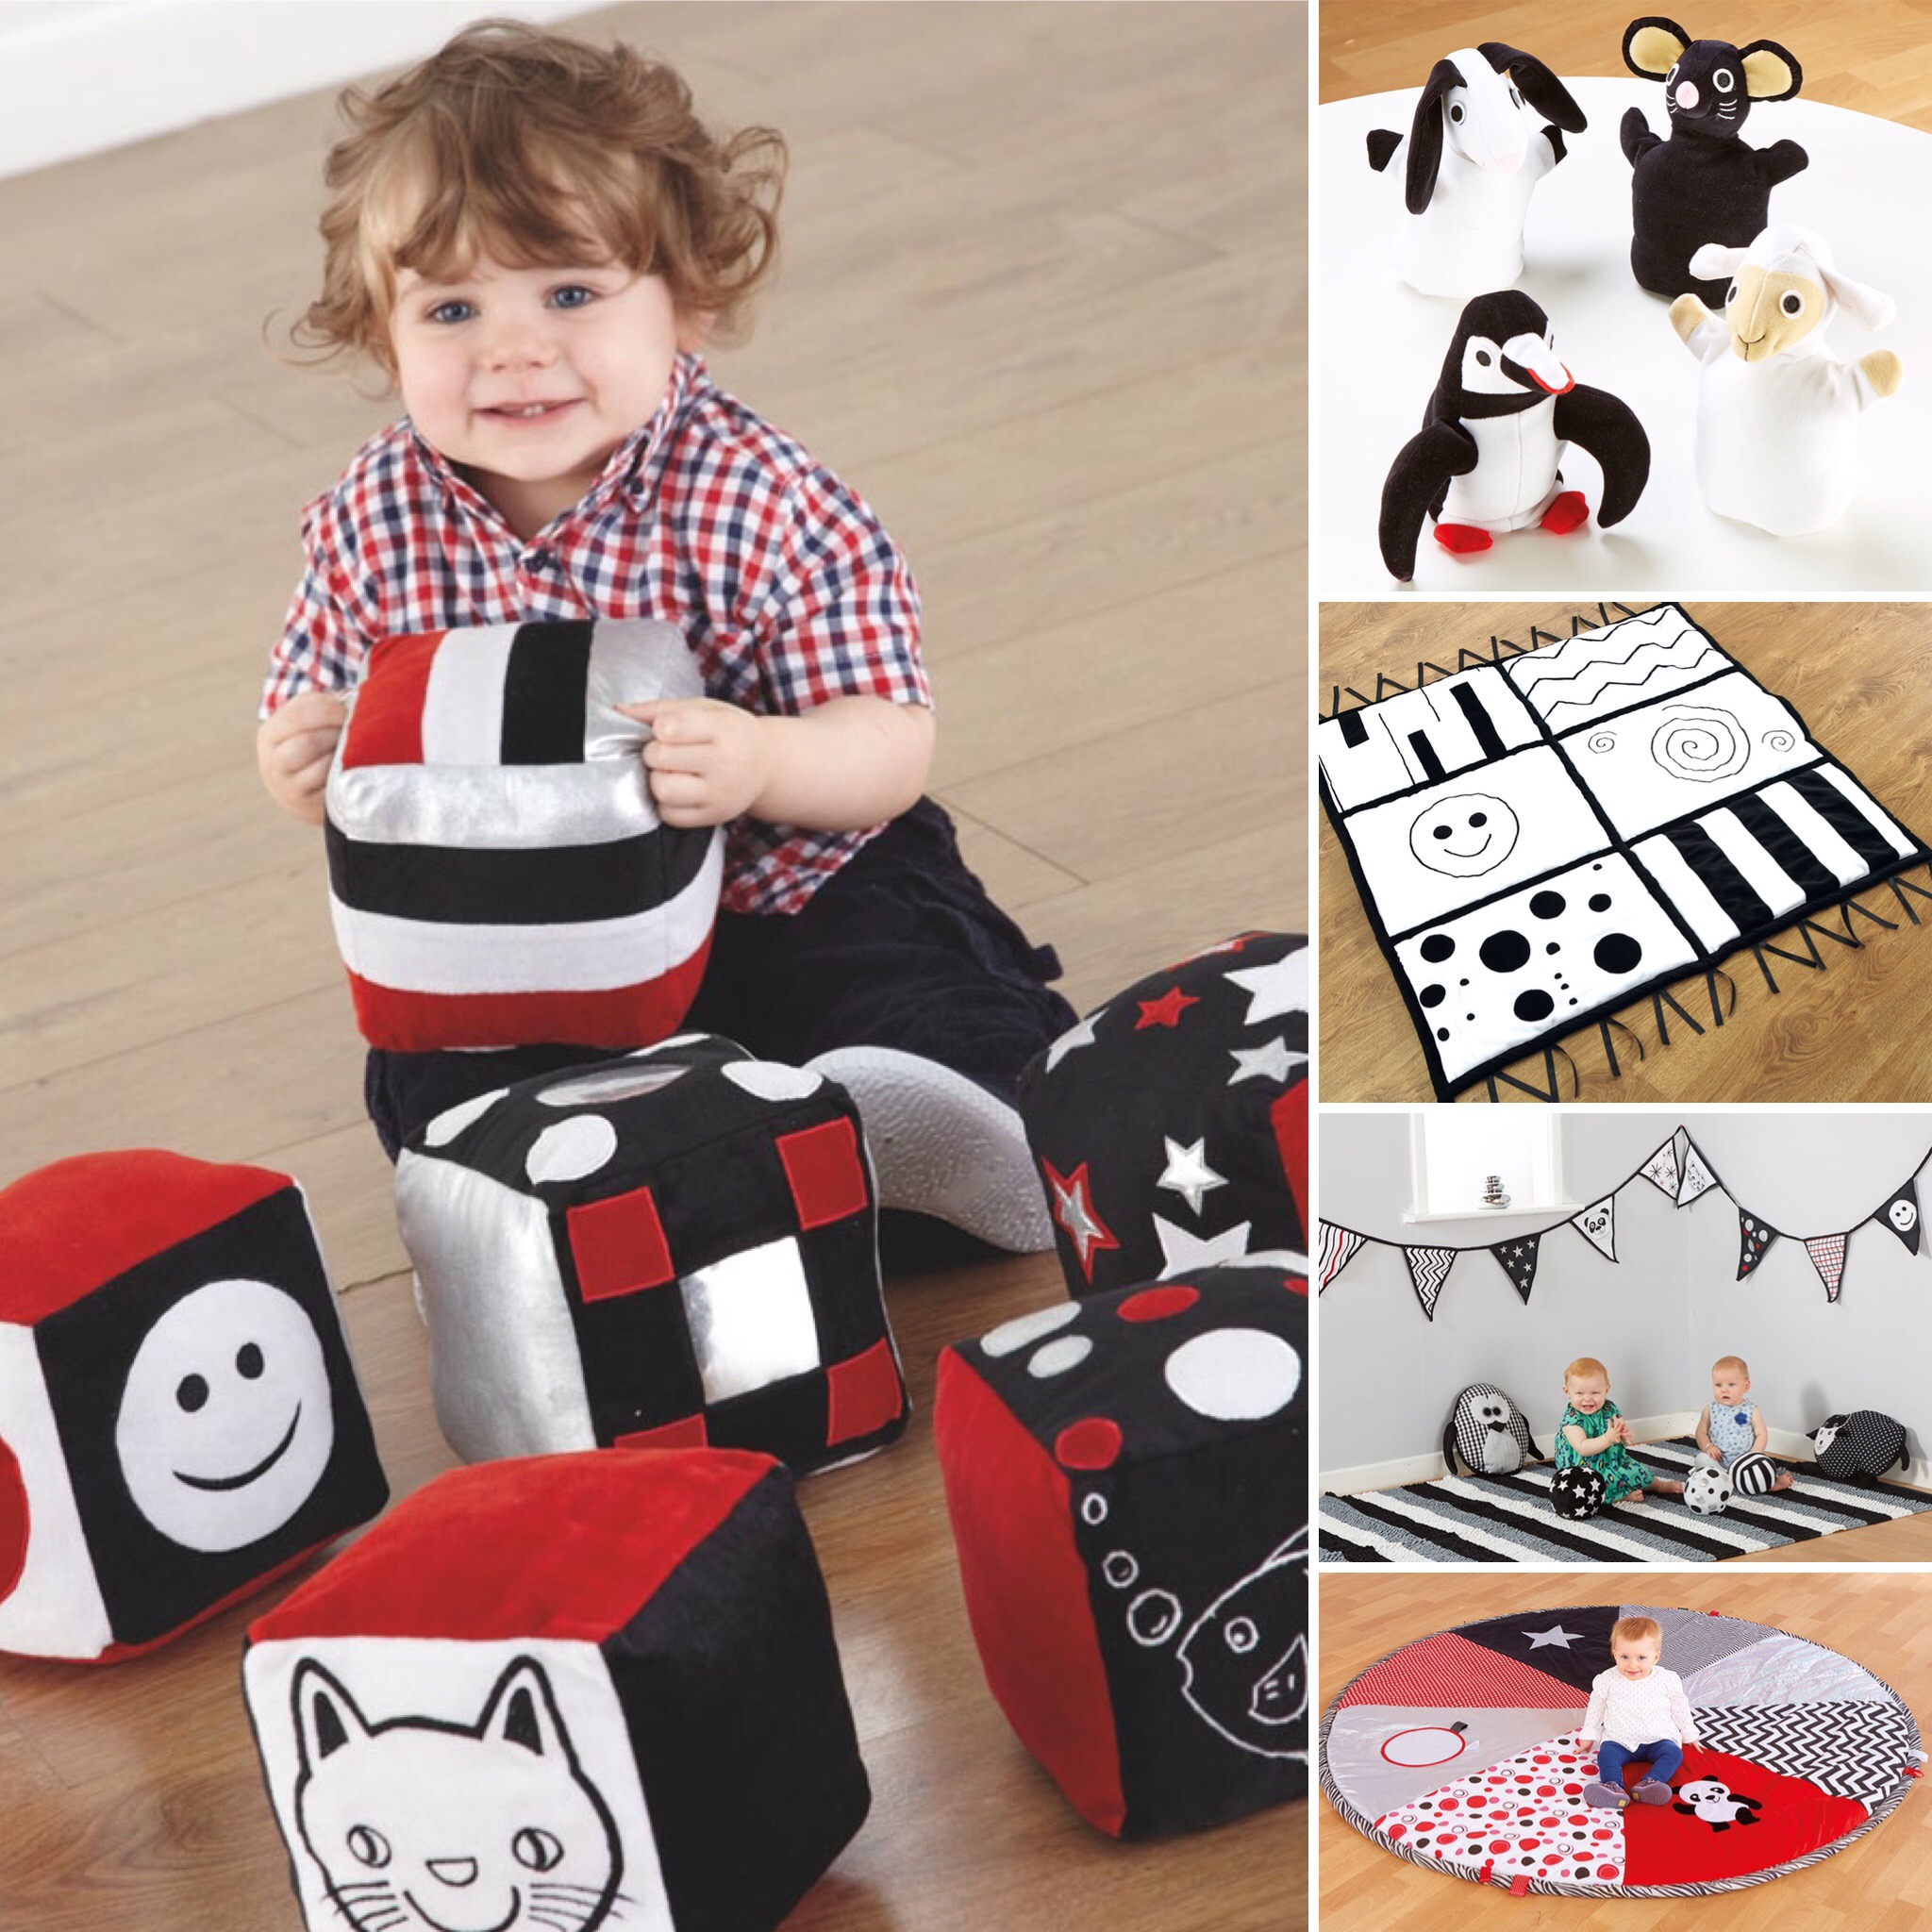 Why do babies need black and white toys?